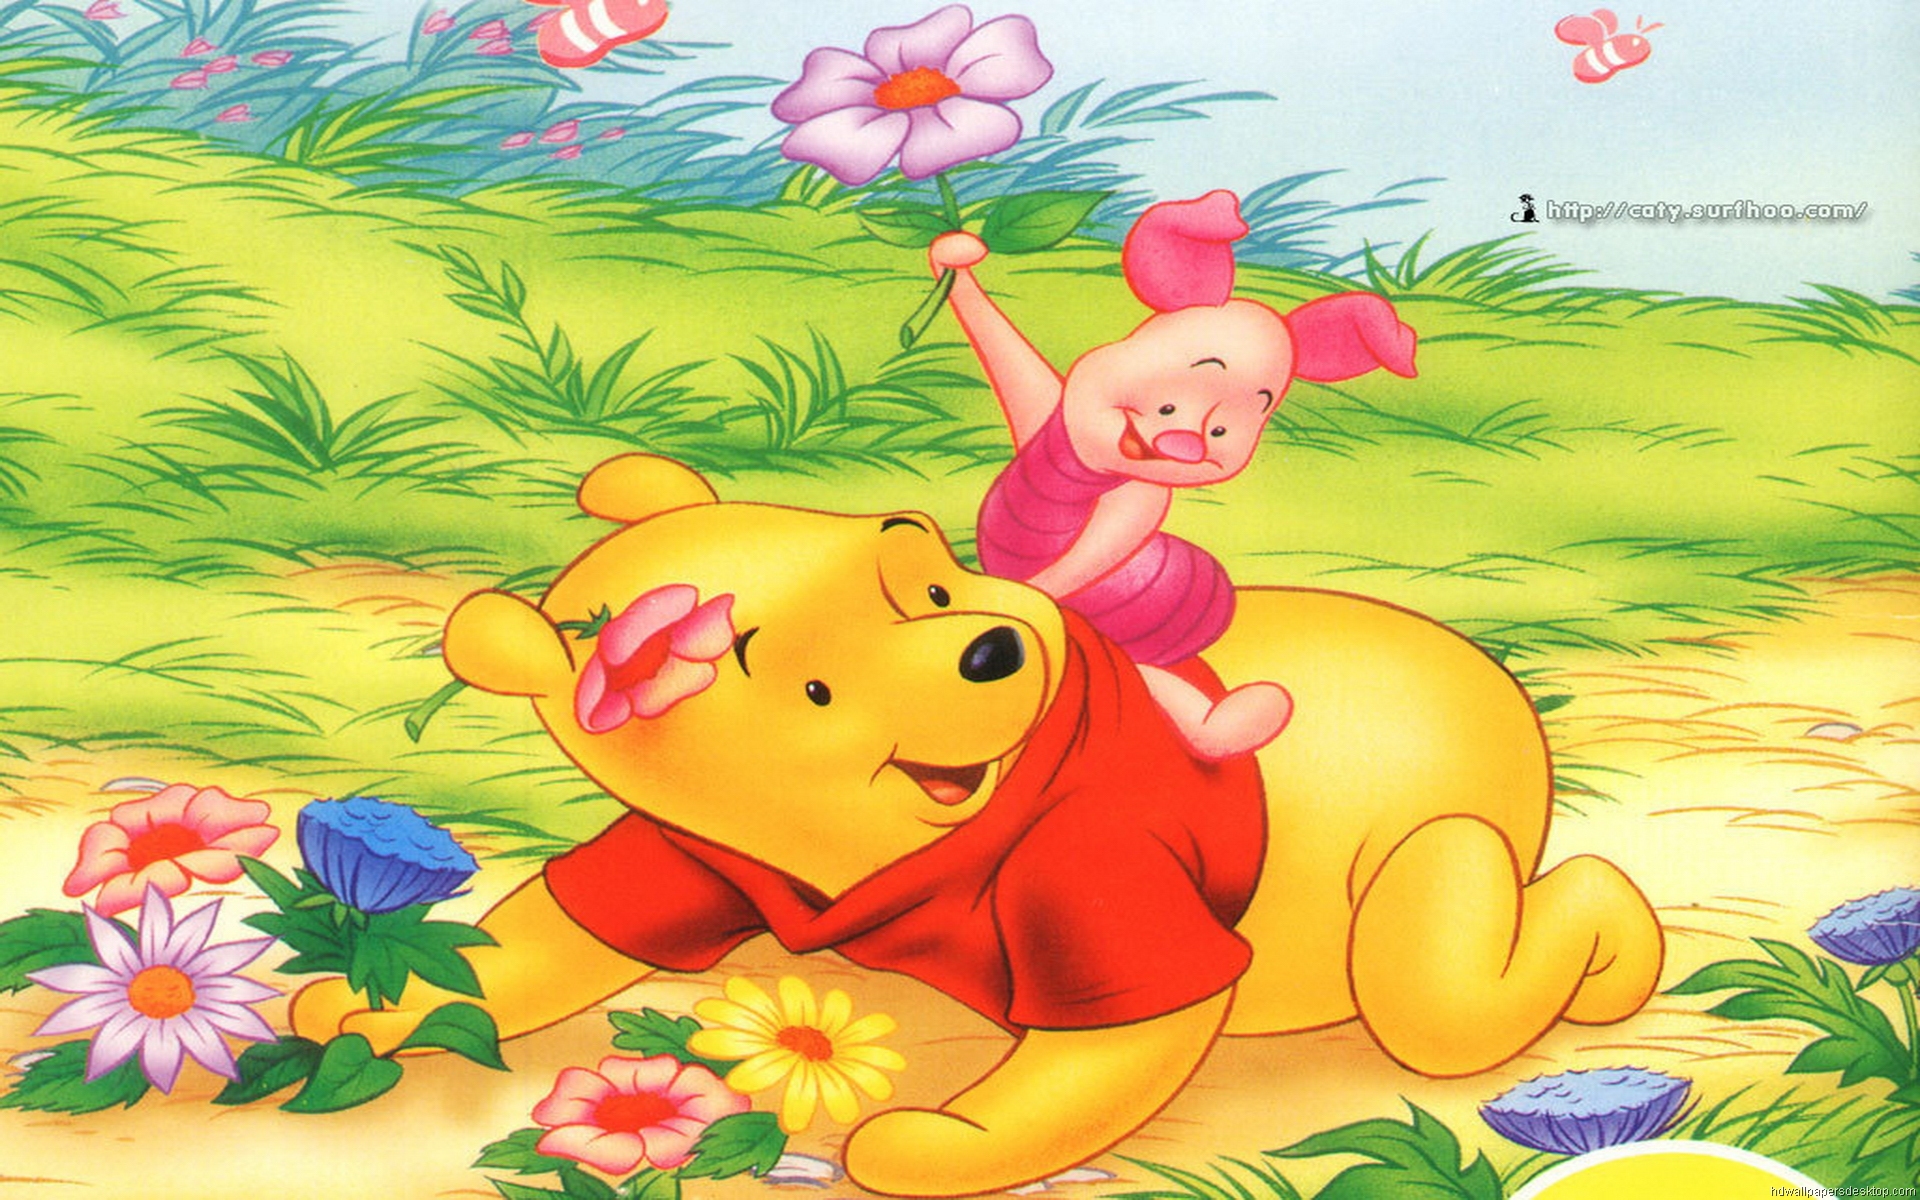 Disney Winnie The Pooh Wallpapers 422853 - Baby Pooh And Piglet , HD Wallpaper & Backgrounds